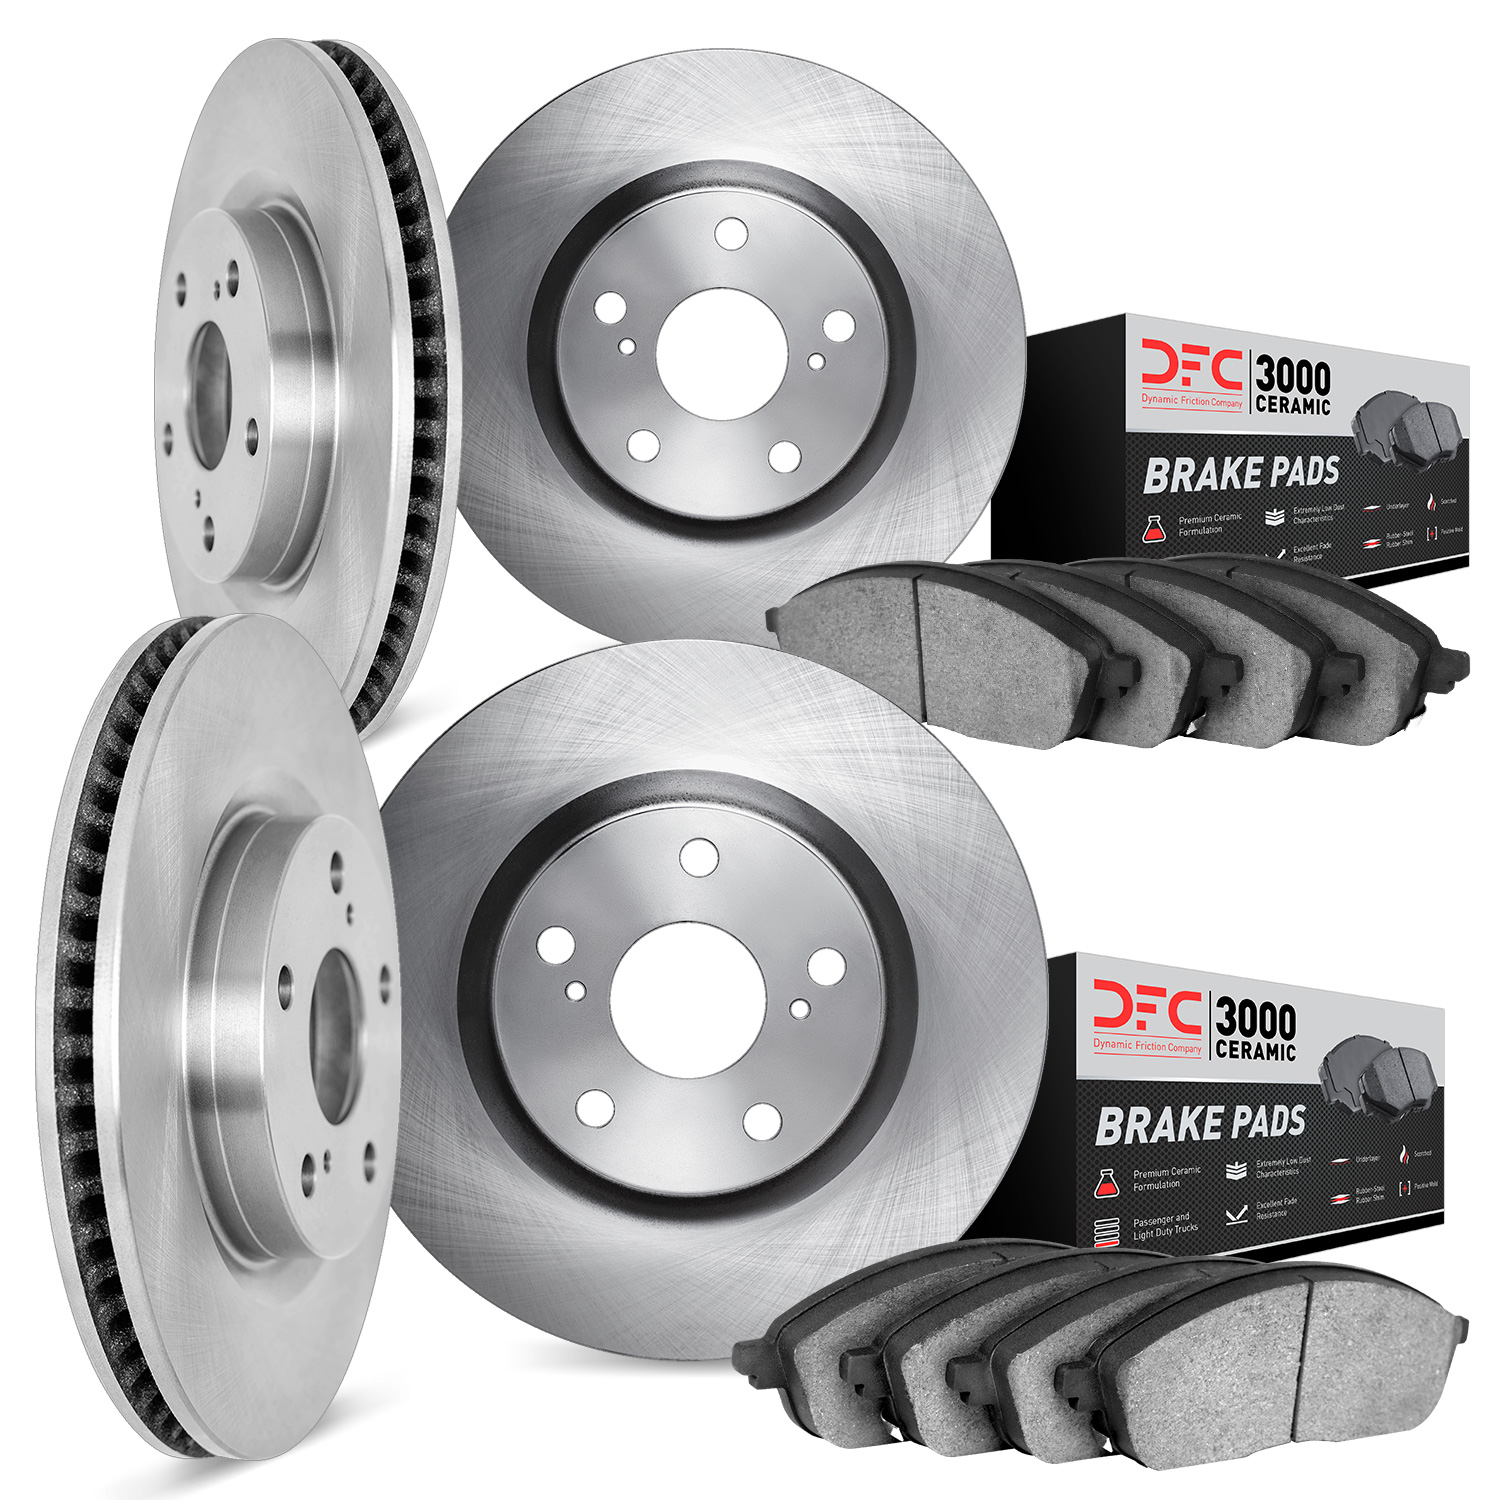 6304-75004 Brake Rotors with 3000-Series Ceramic Brake Pads Kit, 1992-2000 Lexus/Toyota/Scion, Position: Front and Rear